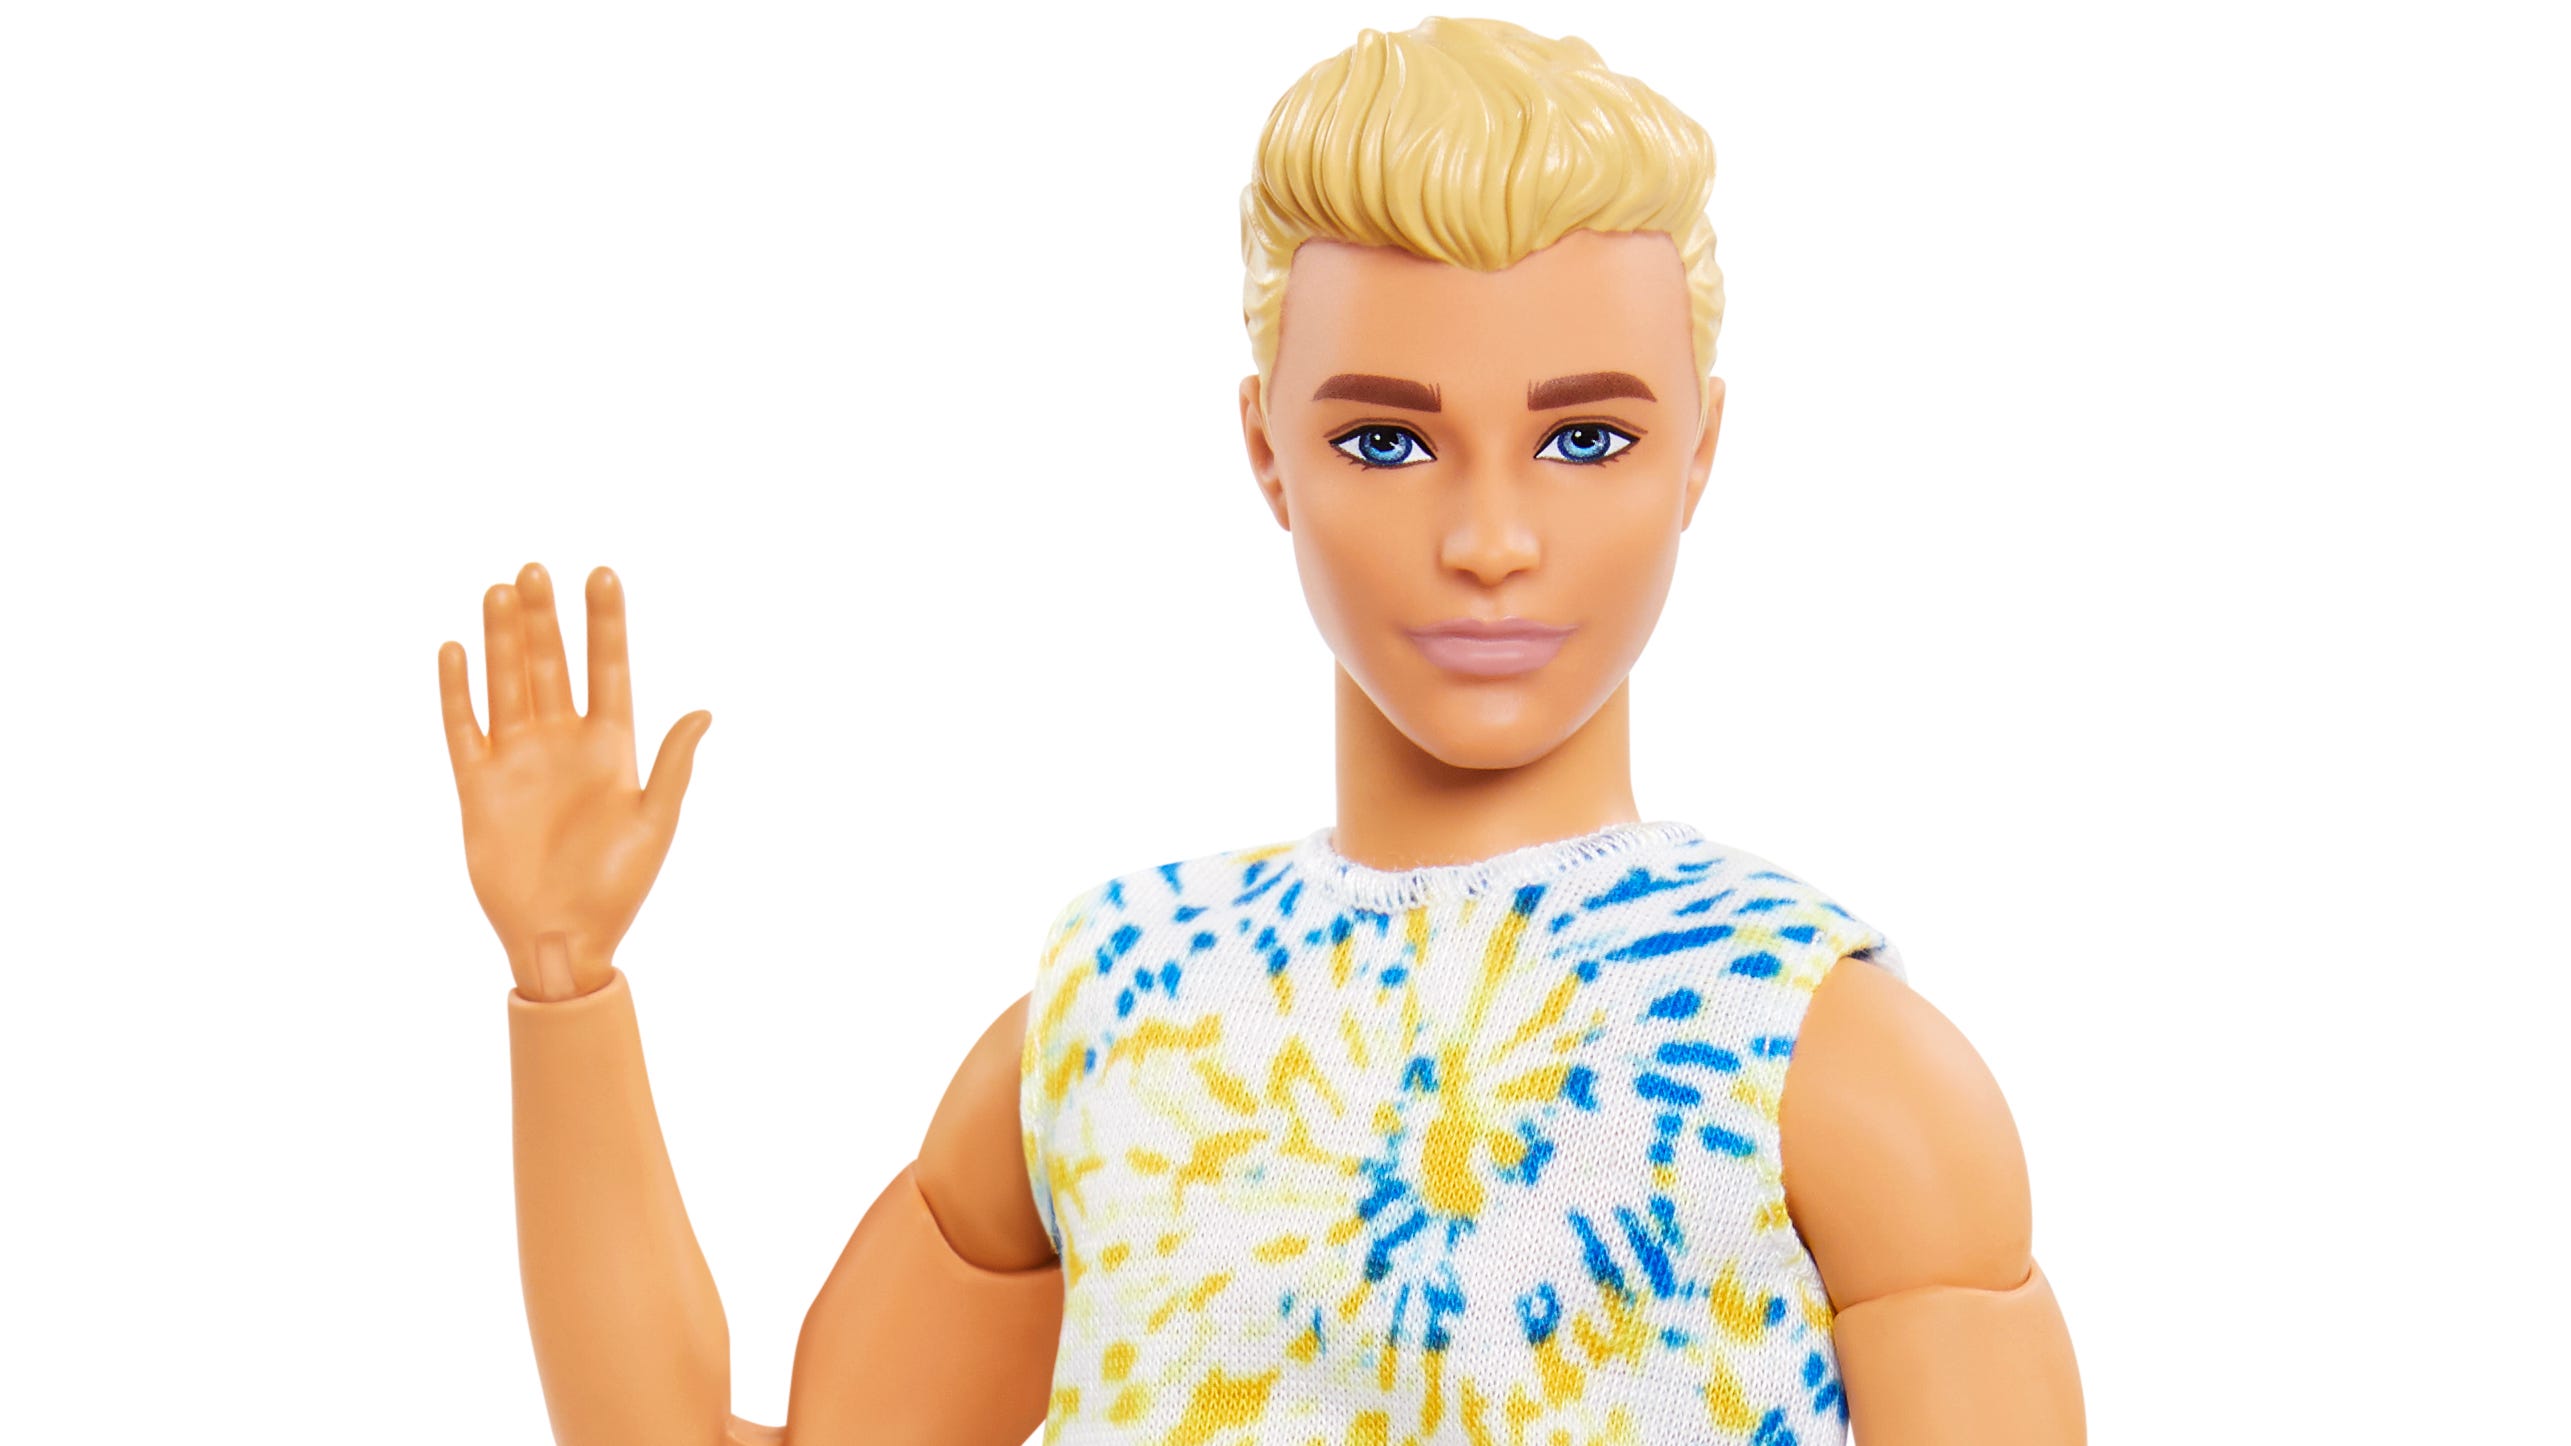 ken with blue hair doll